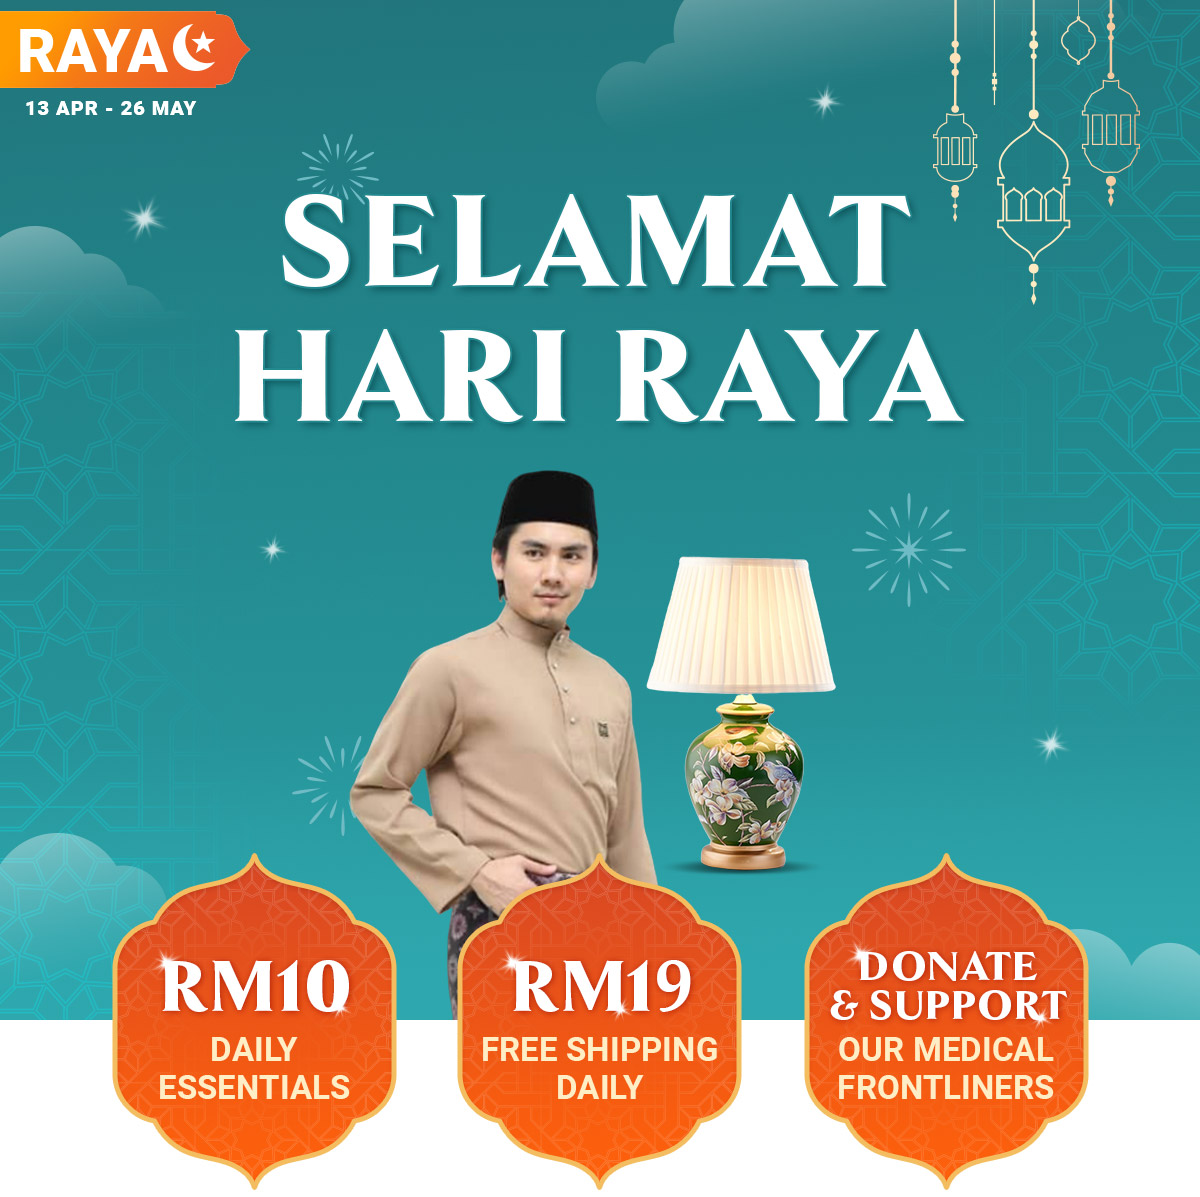 Raya Sale 2020, Daily RM10 Essentials Deals & RM19 Free Shipping